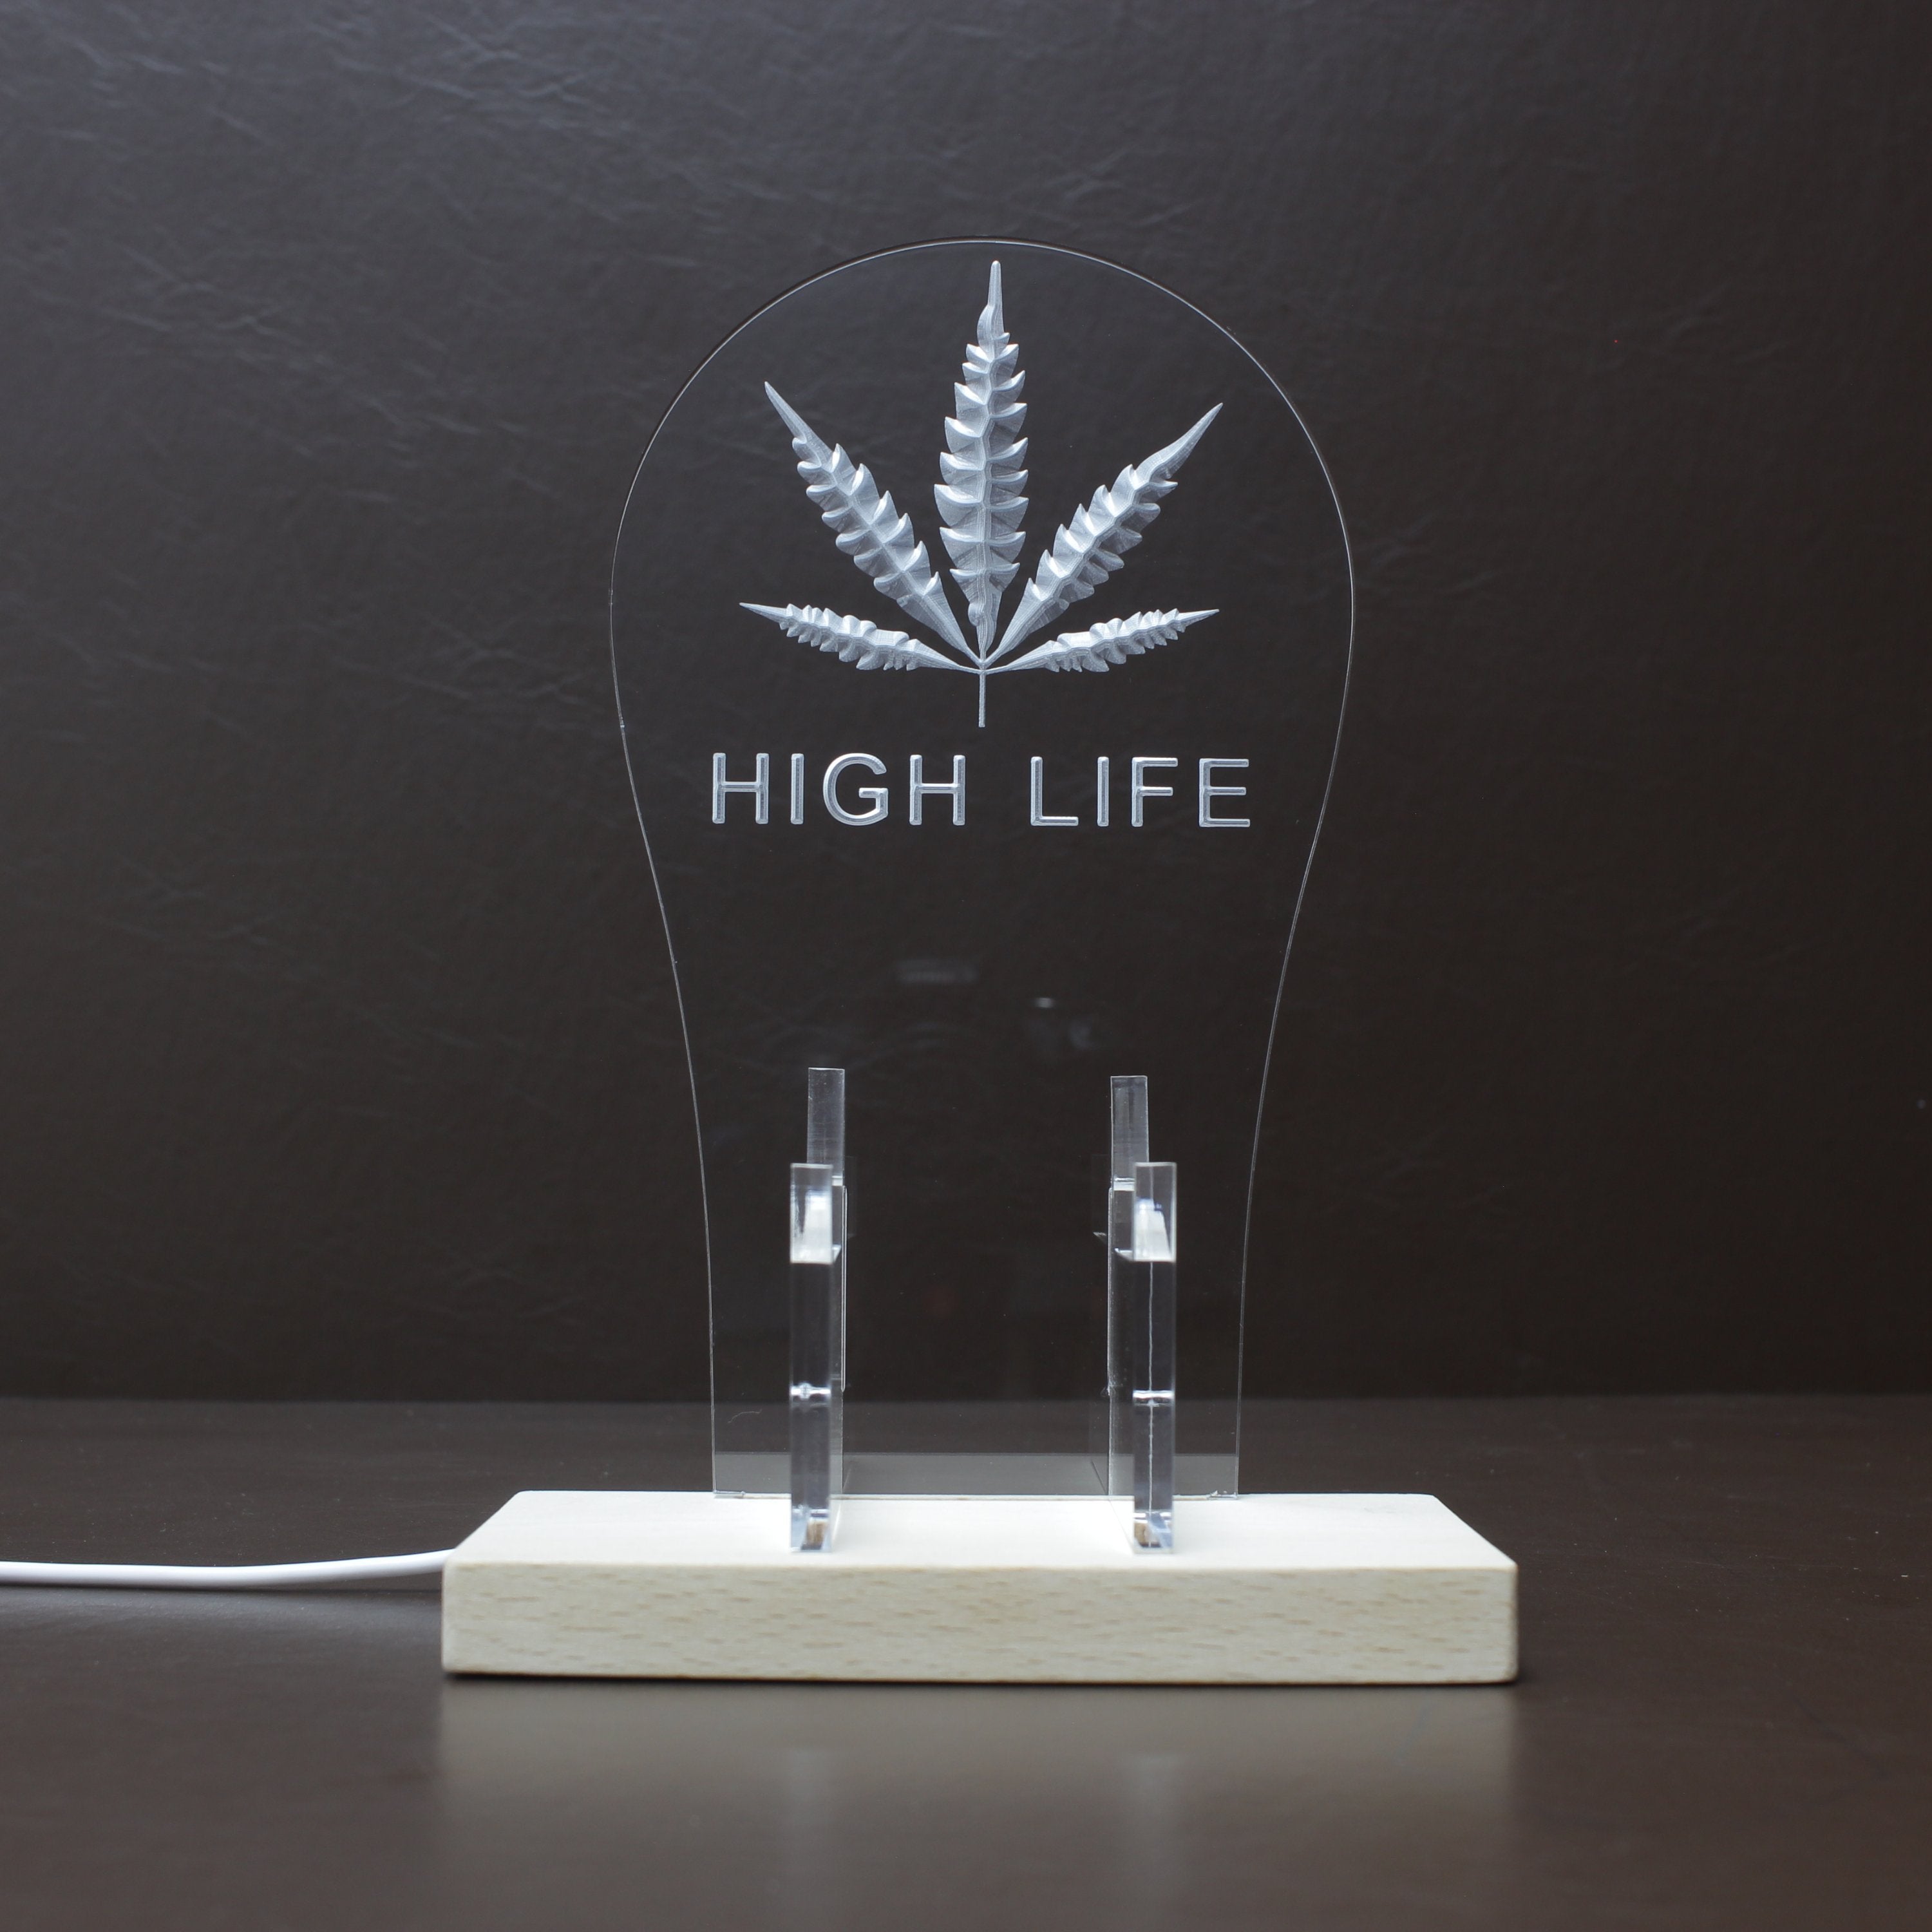 High Life Leaf LED Gaming Headset Controller Stand